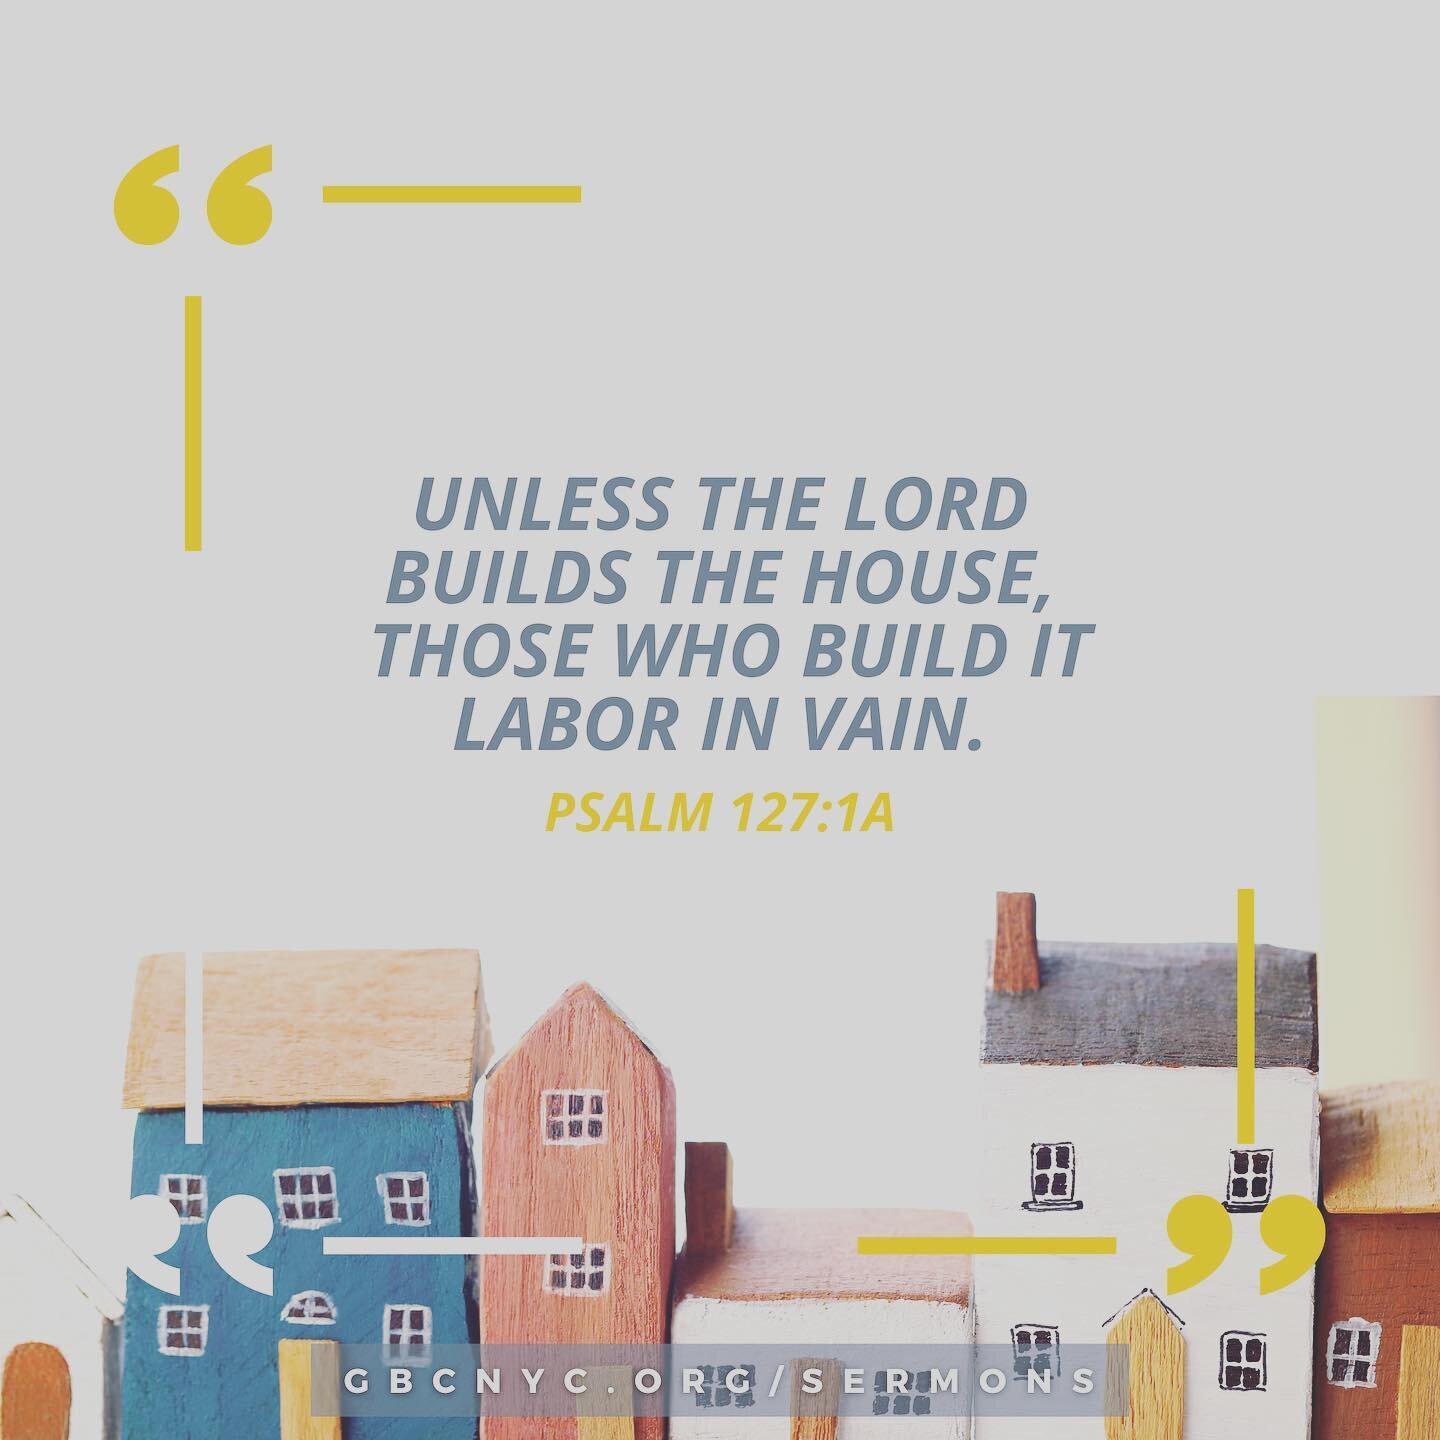 &ldquo;Unless the Lord Builds the House&rdquo;
Guest Preacher: Keith Allen
YouTube: https://youtu.be/rbQjrLg_KLc